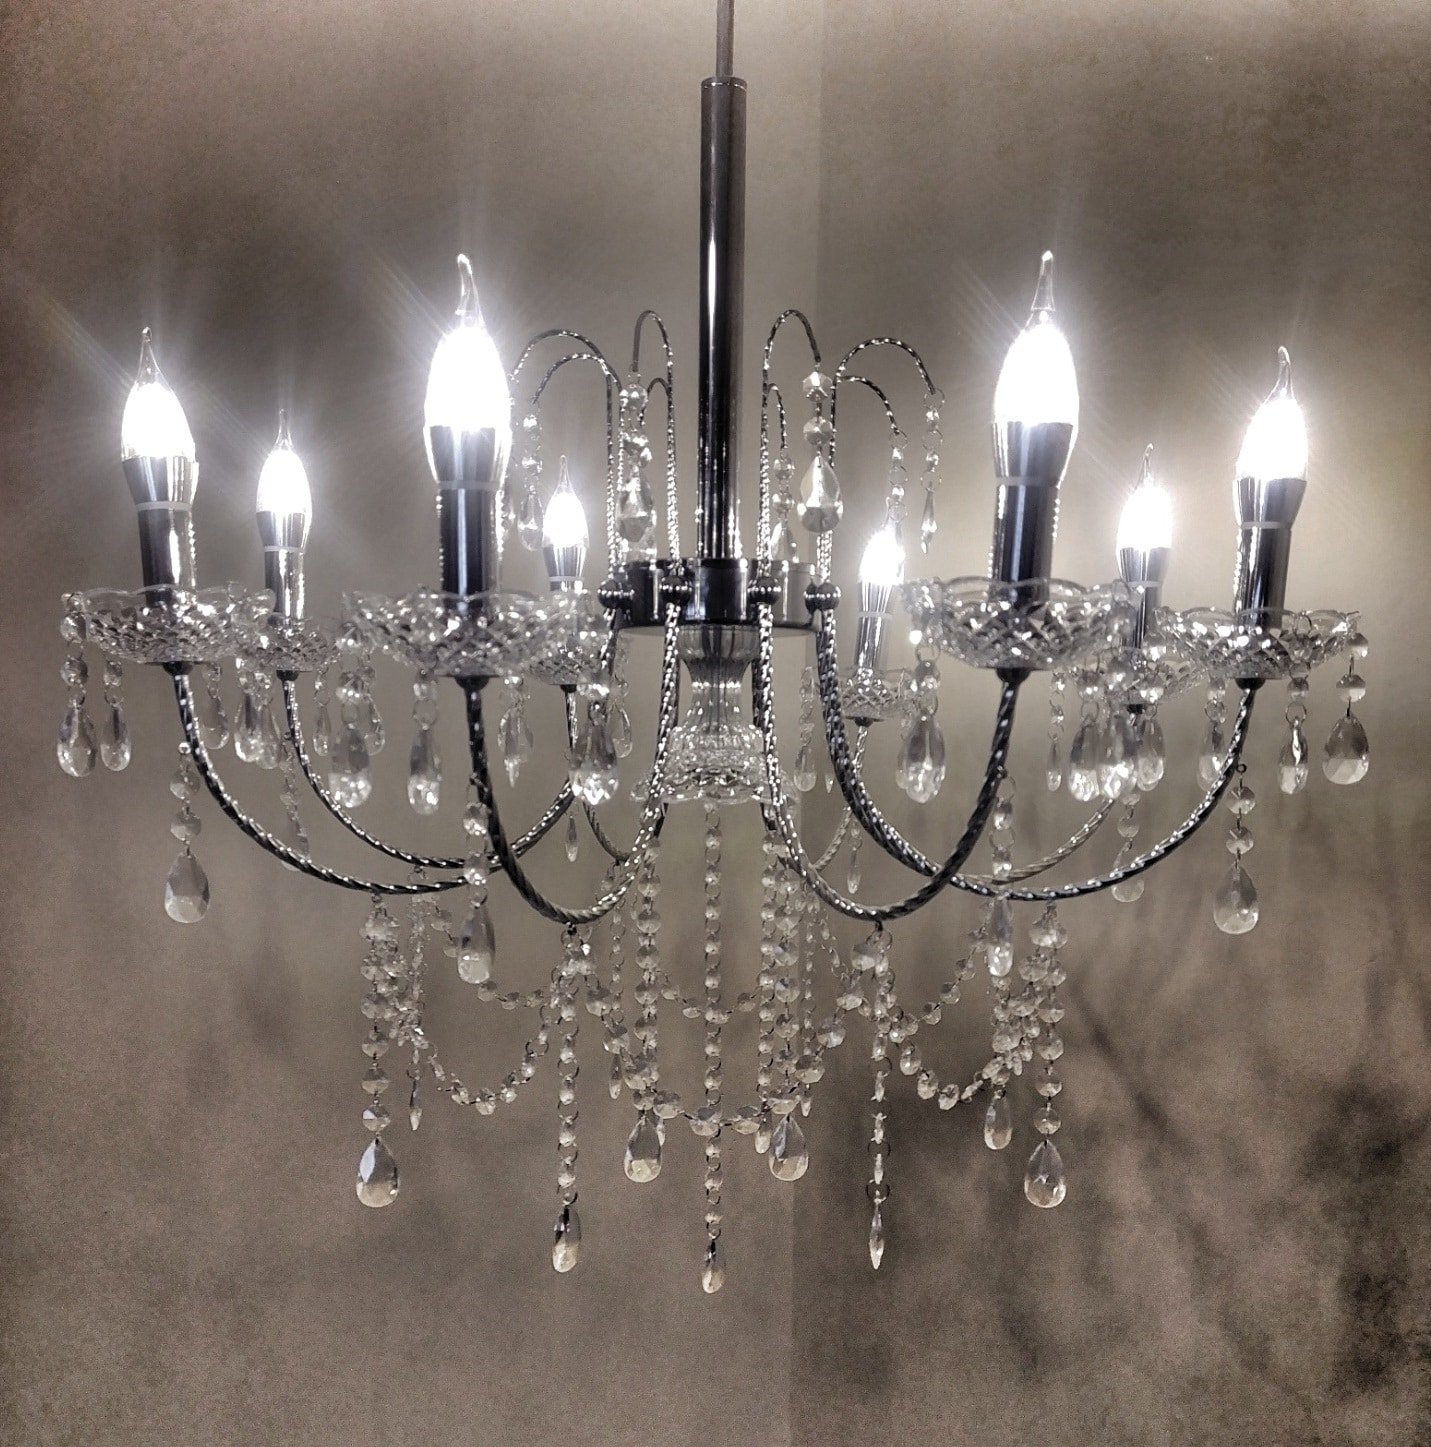 Silver Chandelier light lighting led warm white crystals light weight metal acrylic